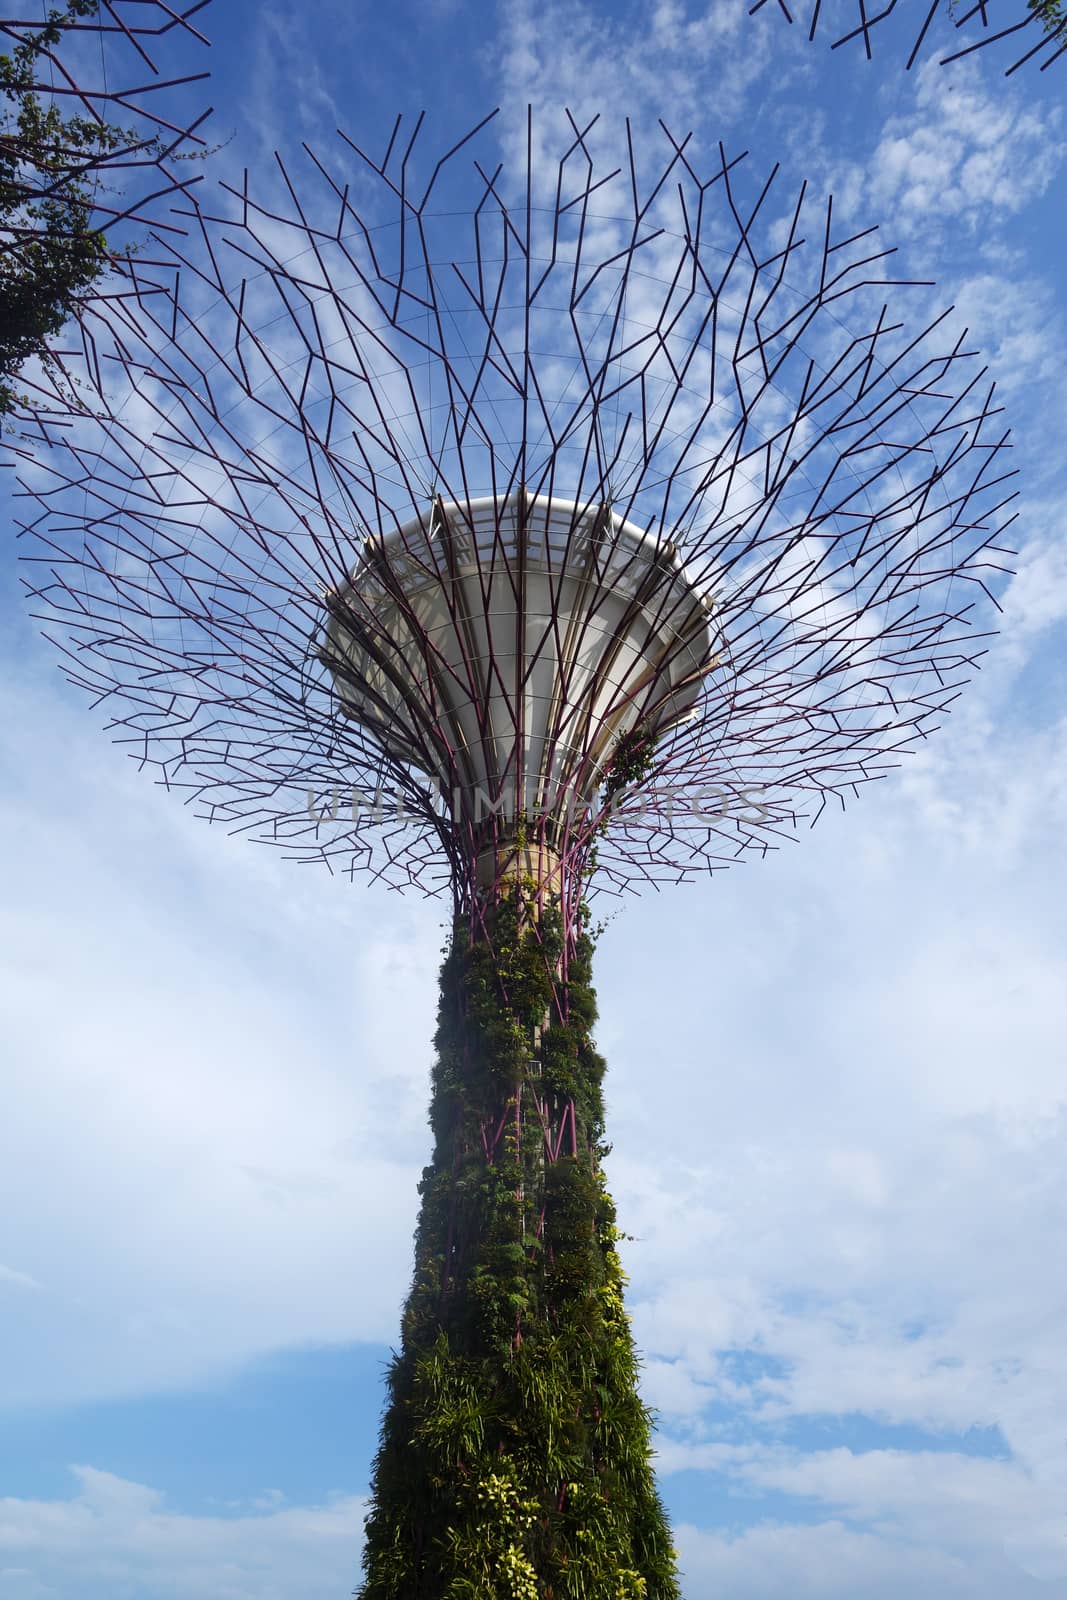 Gardens by the Bay, Singapore by tang90246